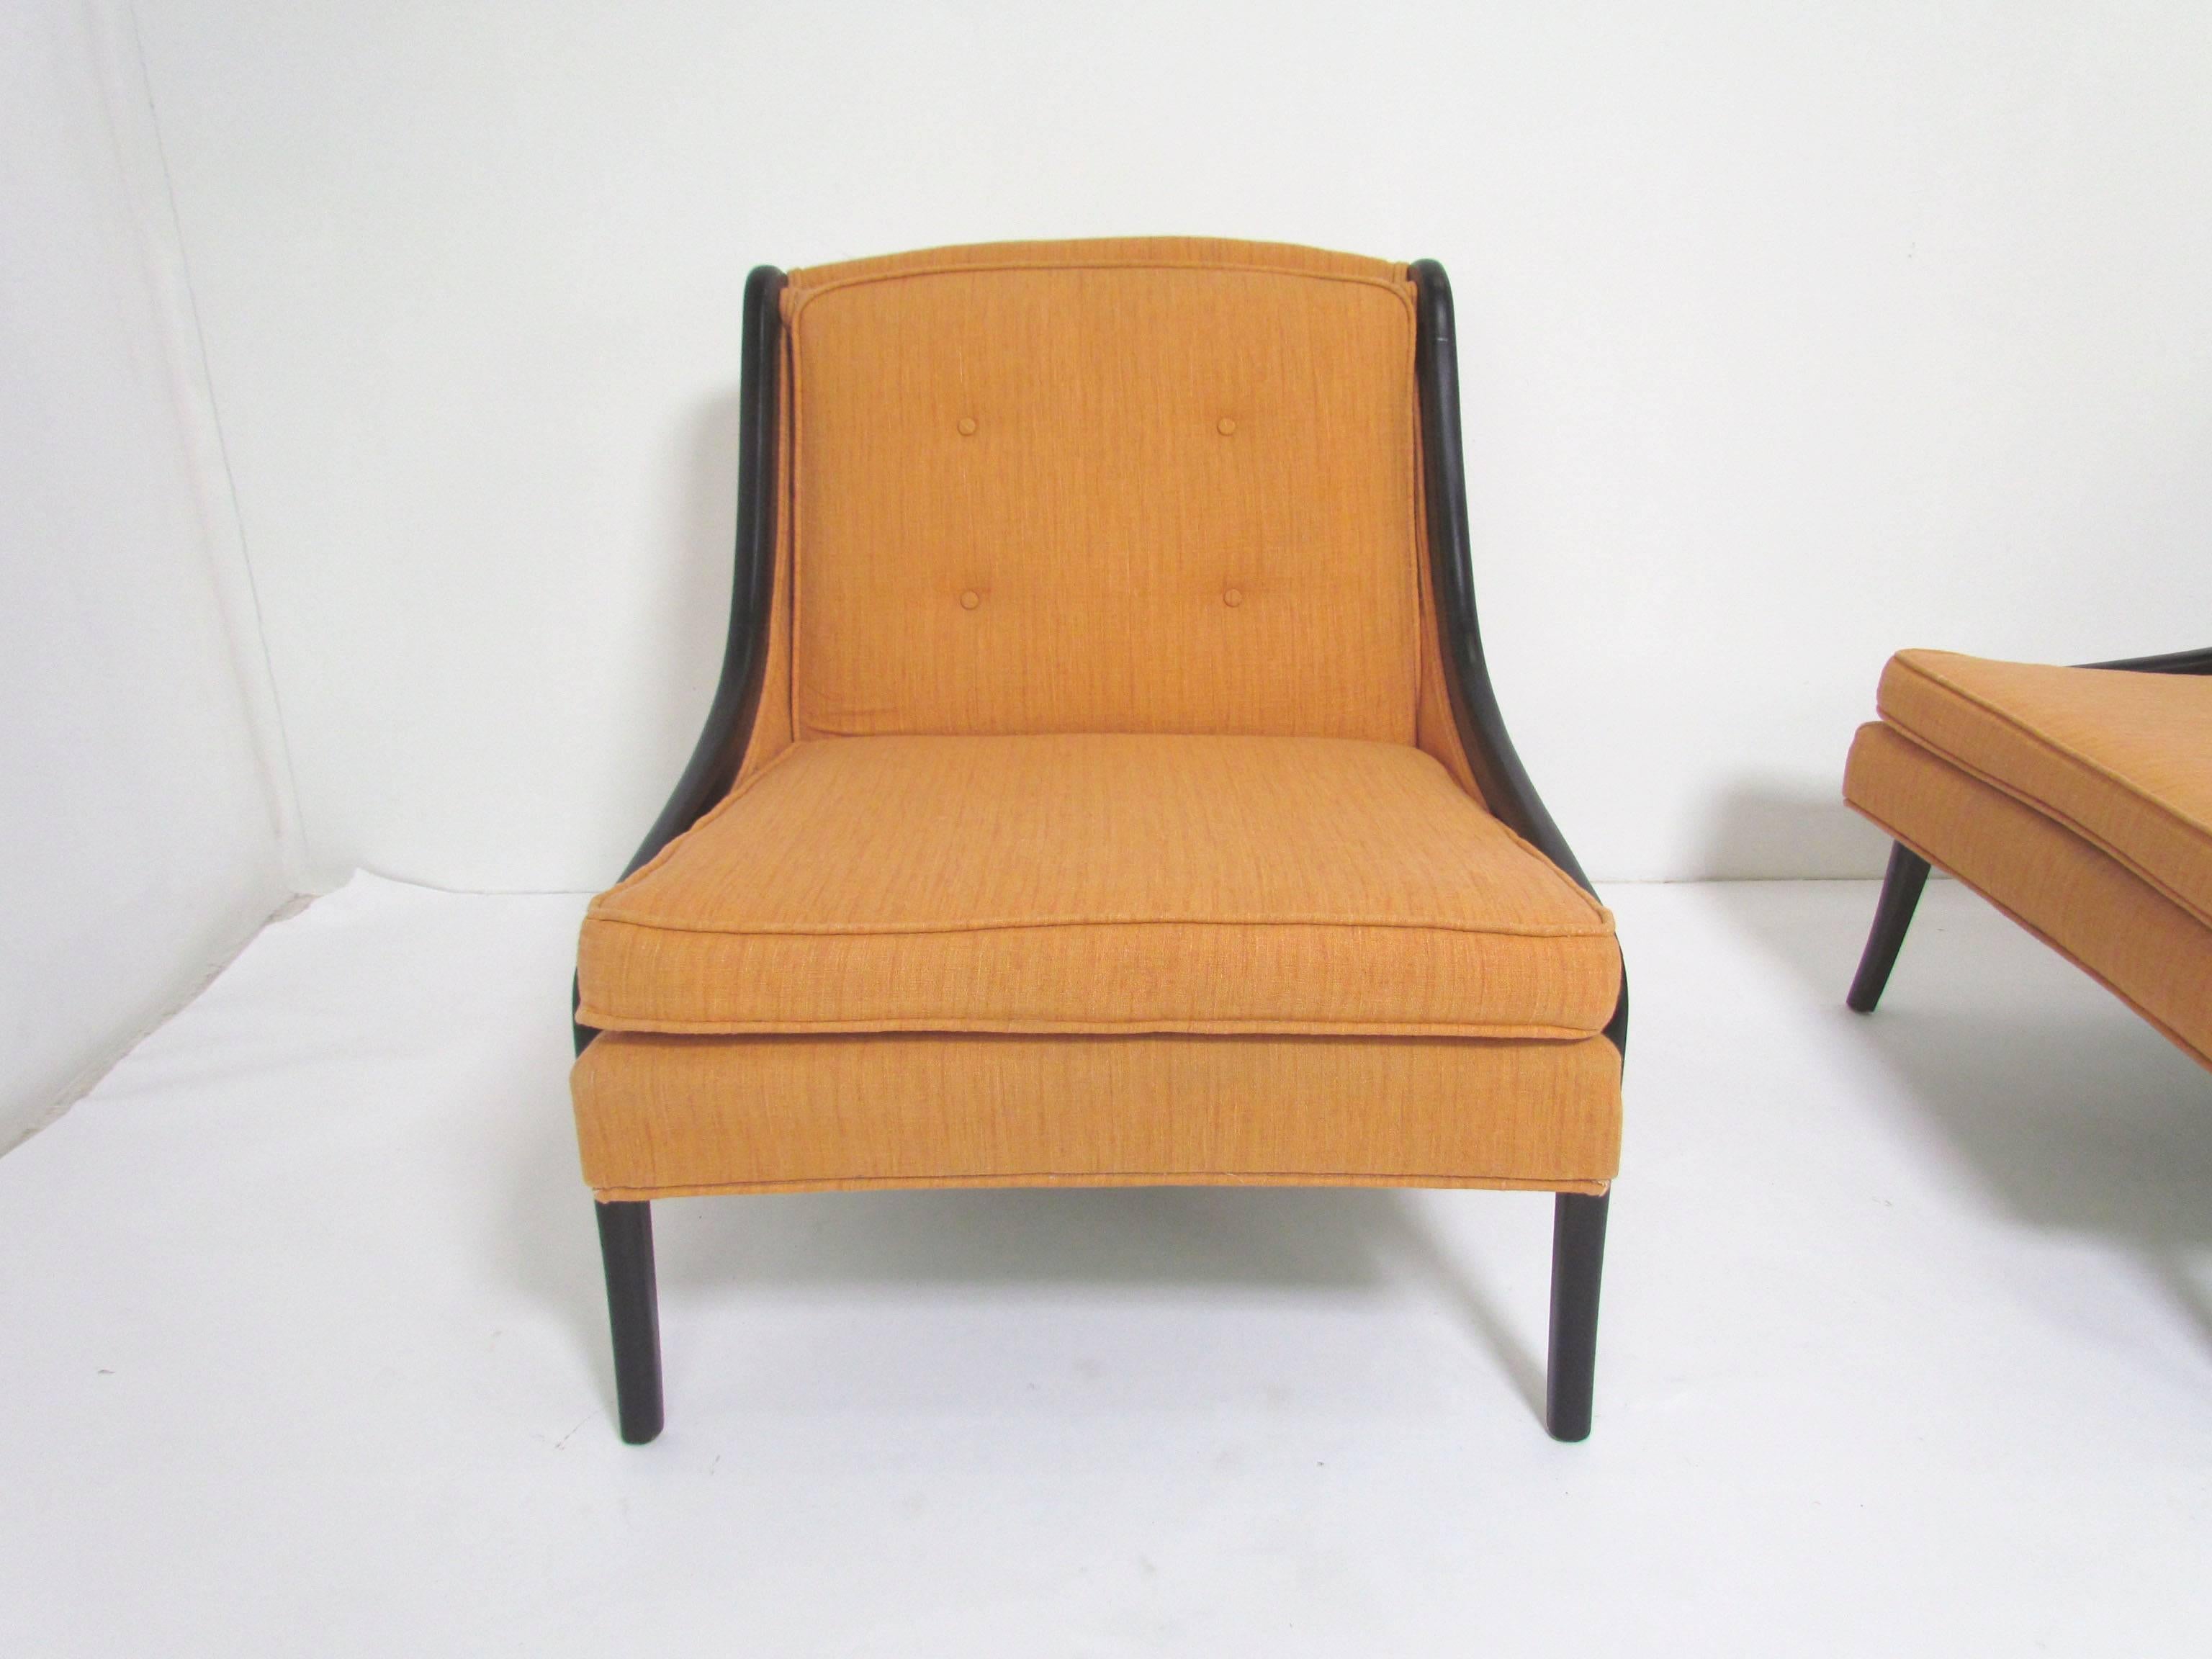 American Pair of Mid-Century Lounge Chairs in Manner of Harvey Probber, circa 1960s